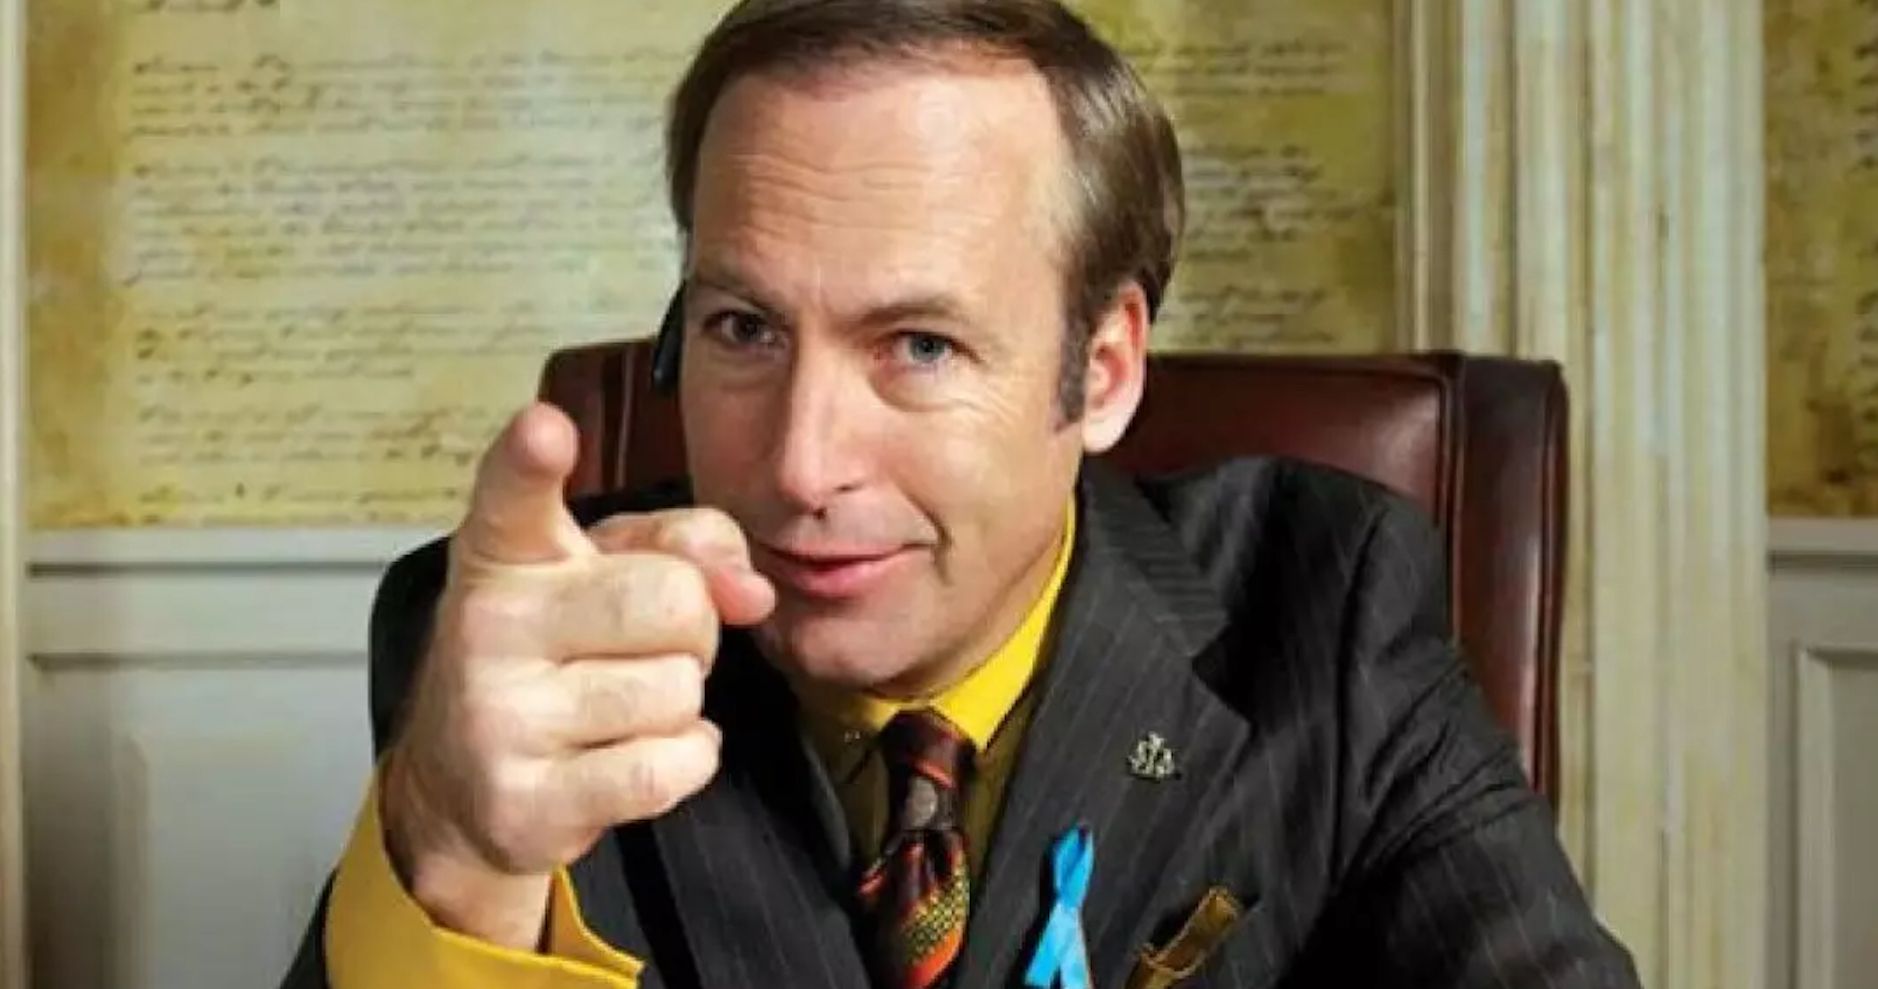 Better Call Saul Is Getting a Fat Albert-Style Animated Prequel Called Slippin' Jimmy